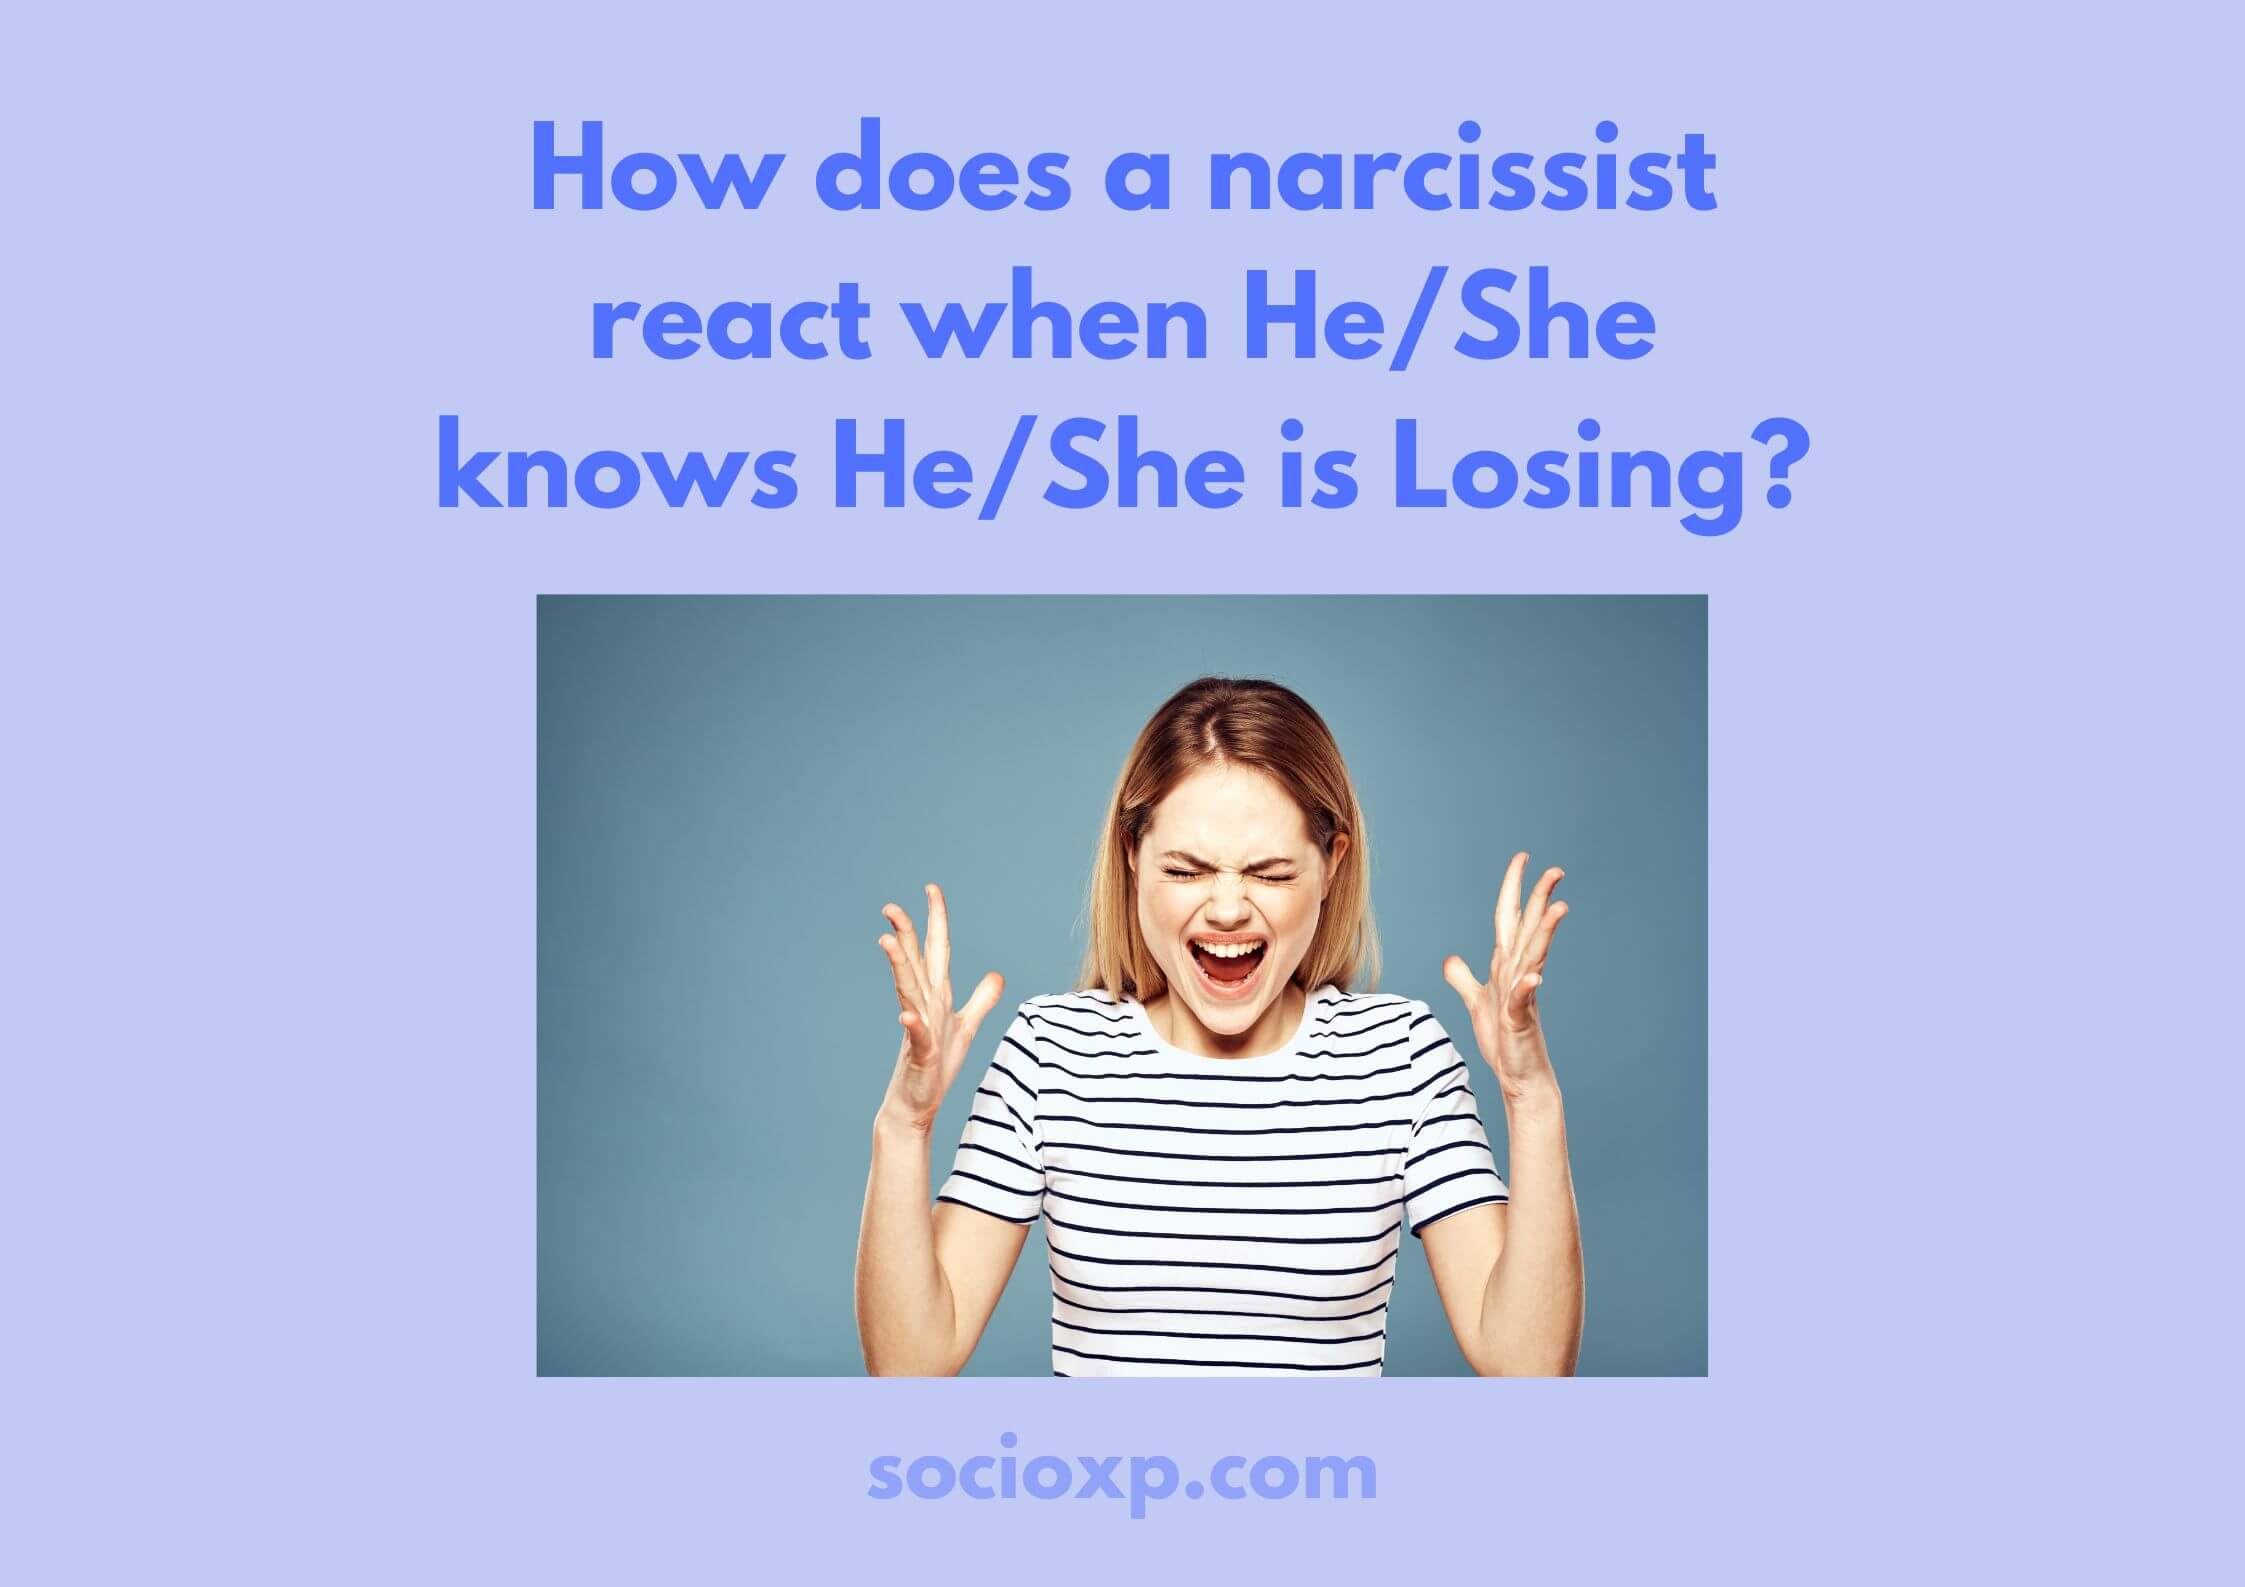 How Does a narcissist react When He/She Knows He/She is Losing?